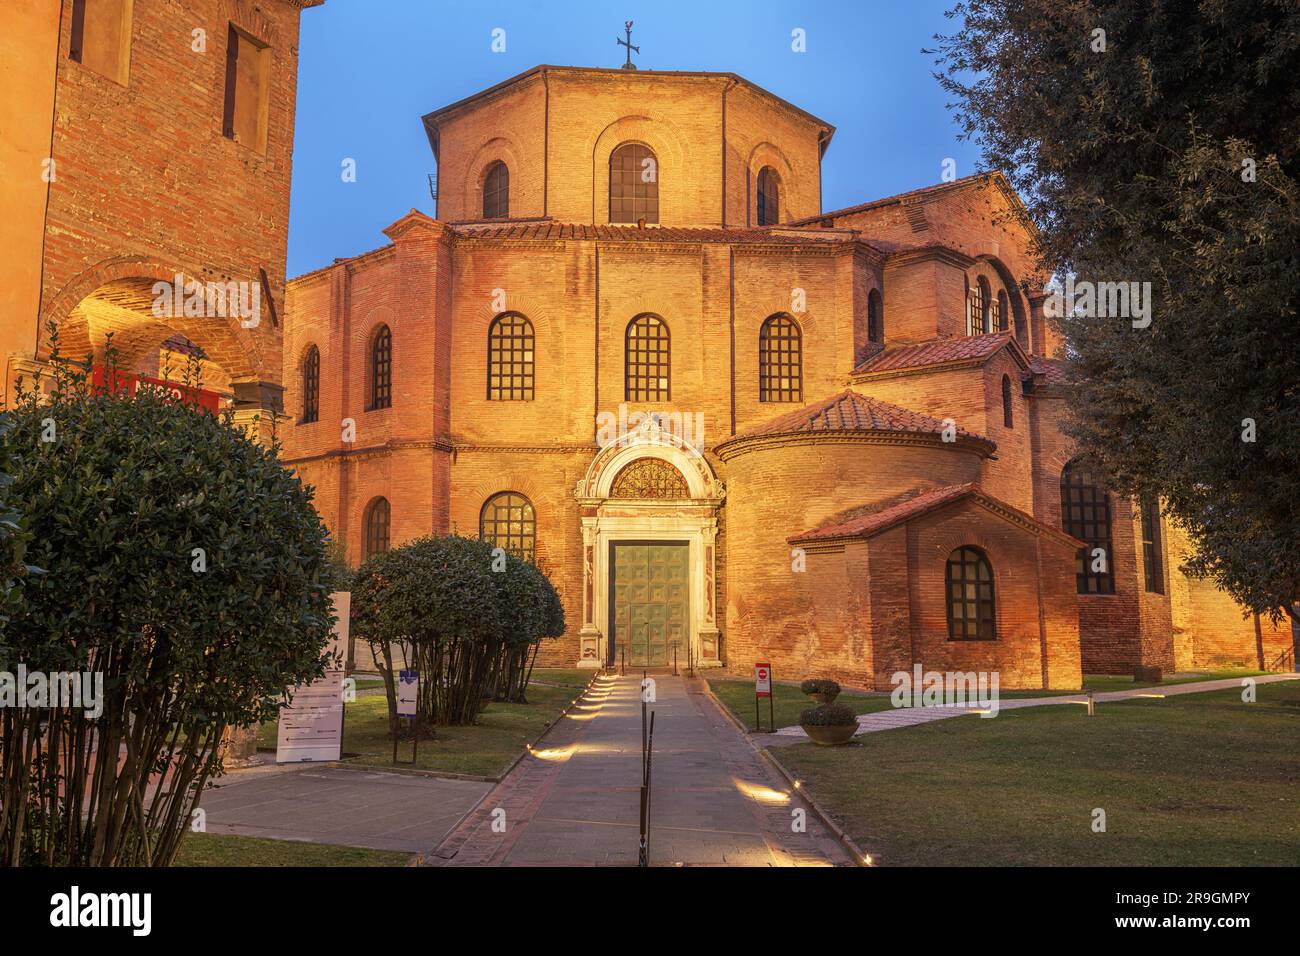 Ravenna, Italy at the historic Basilica of San Vitale in the evening. Stock Photo